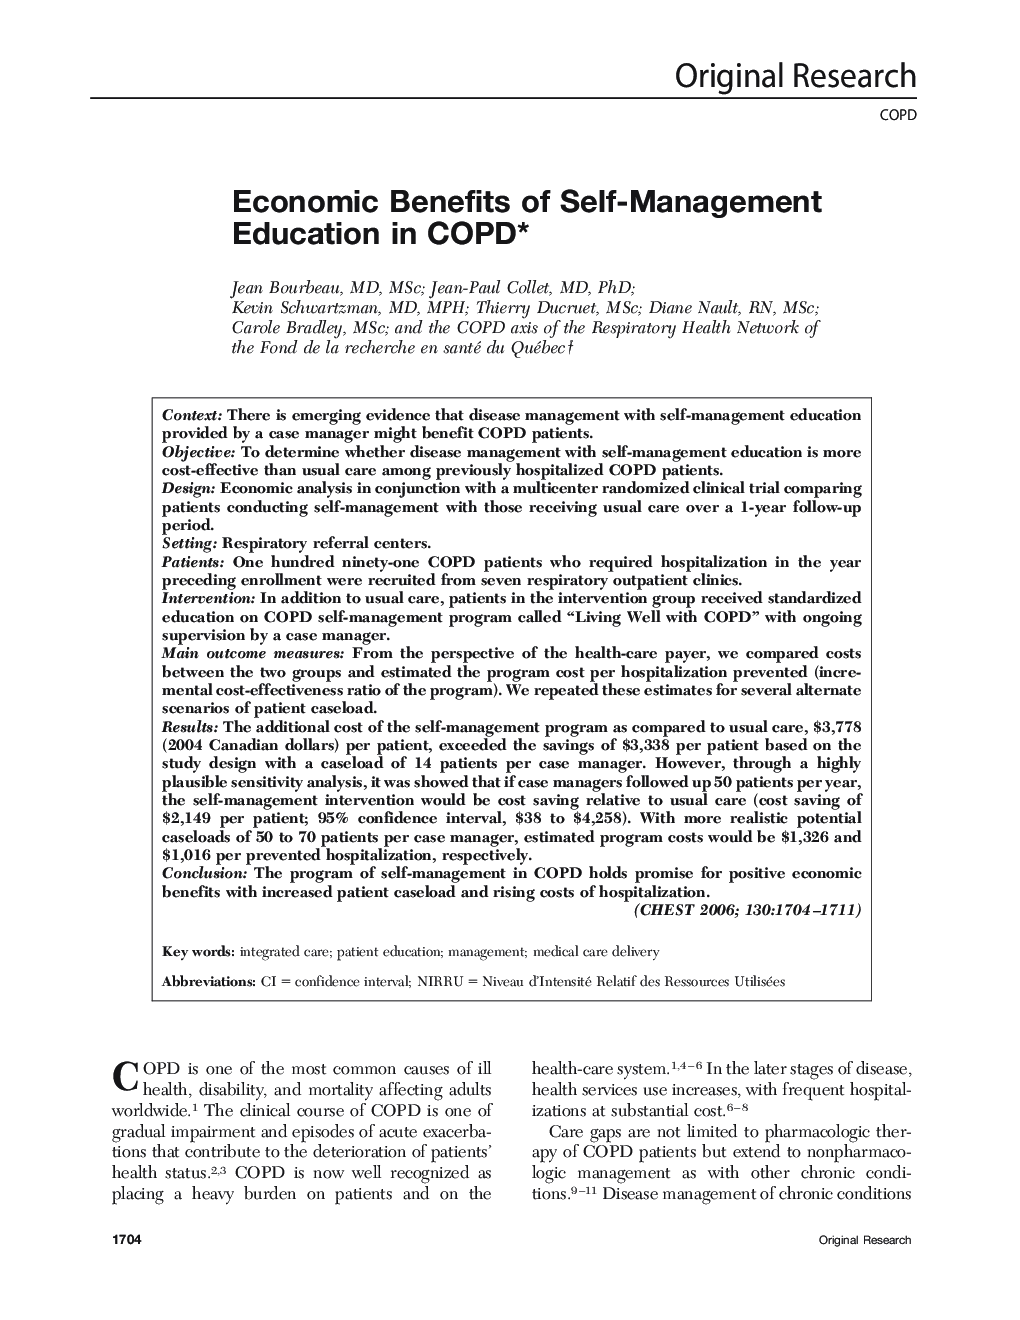 Economic Benefits of Self-Management Education in COPD 